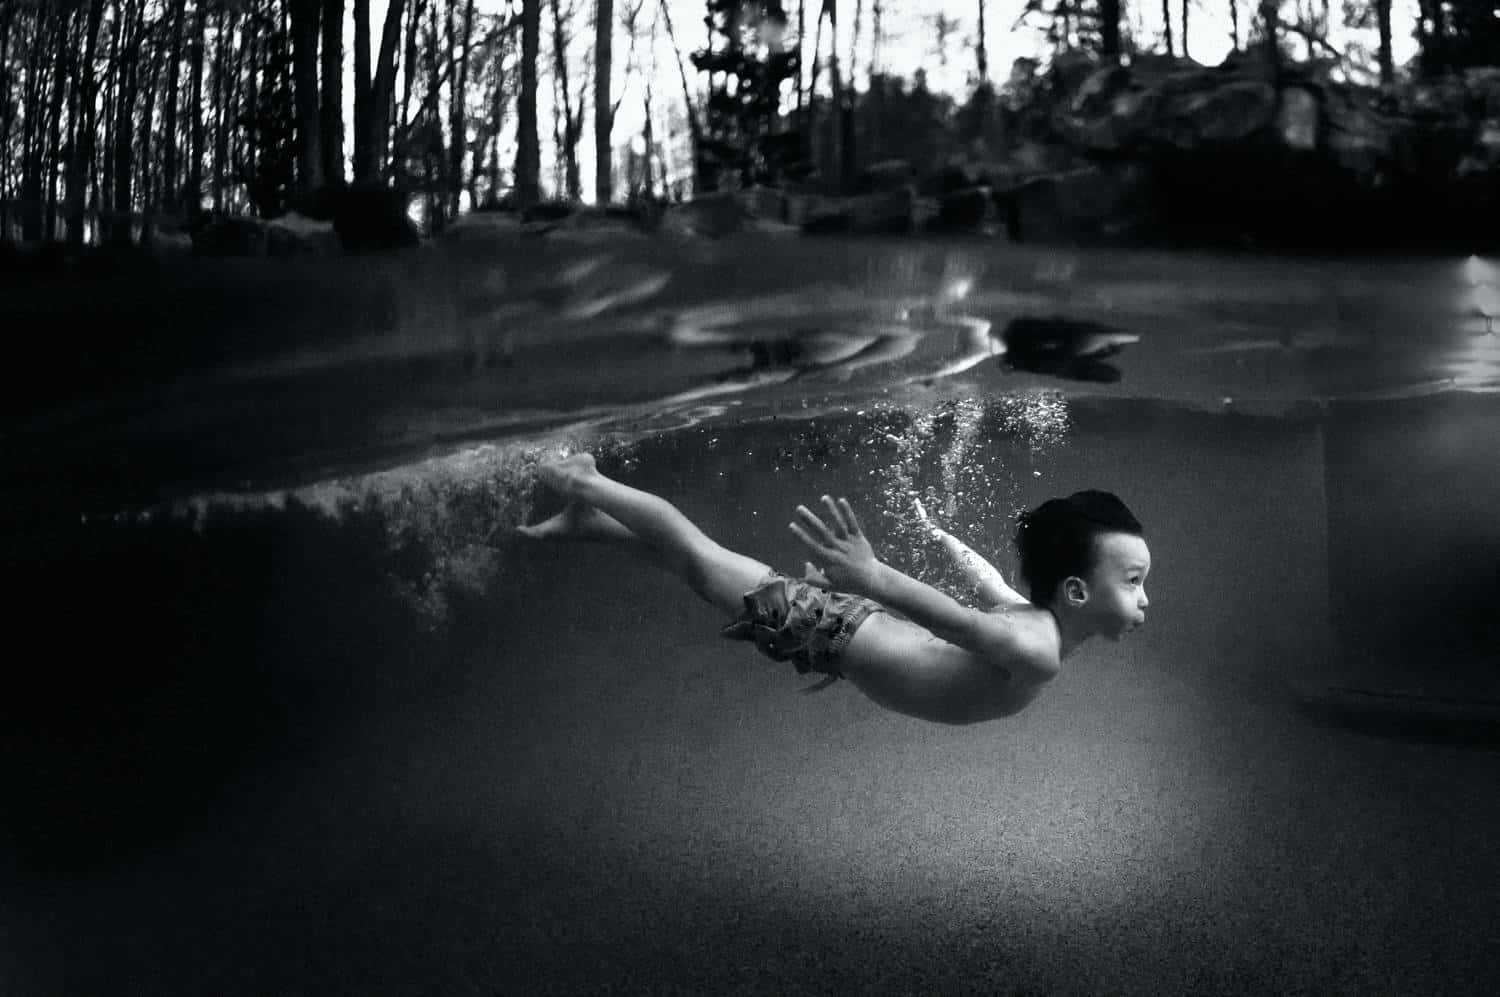 A black and white photographs of a child swimming underwater at dusk